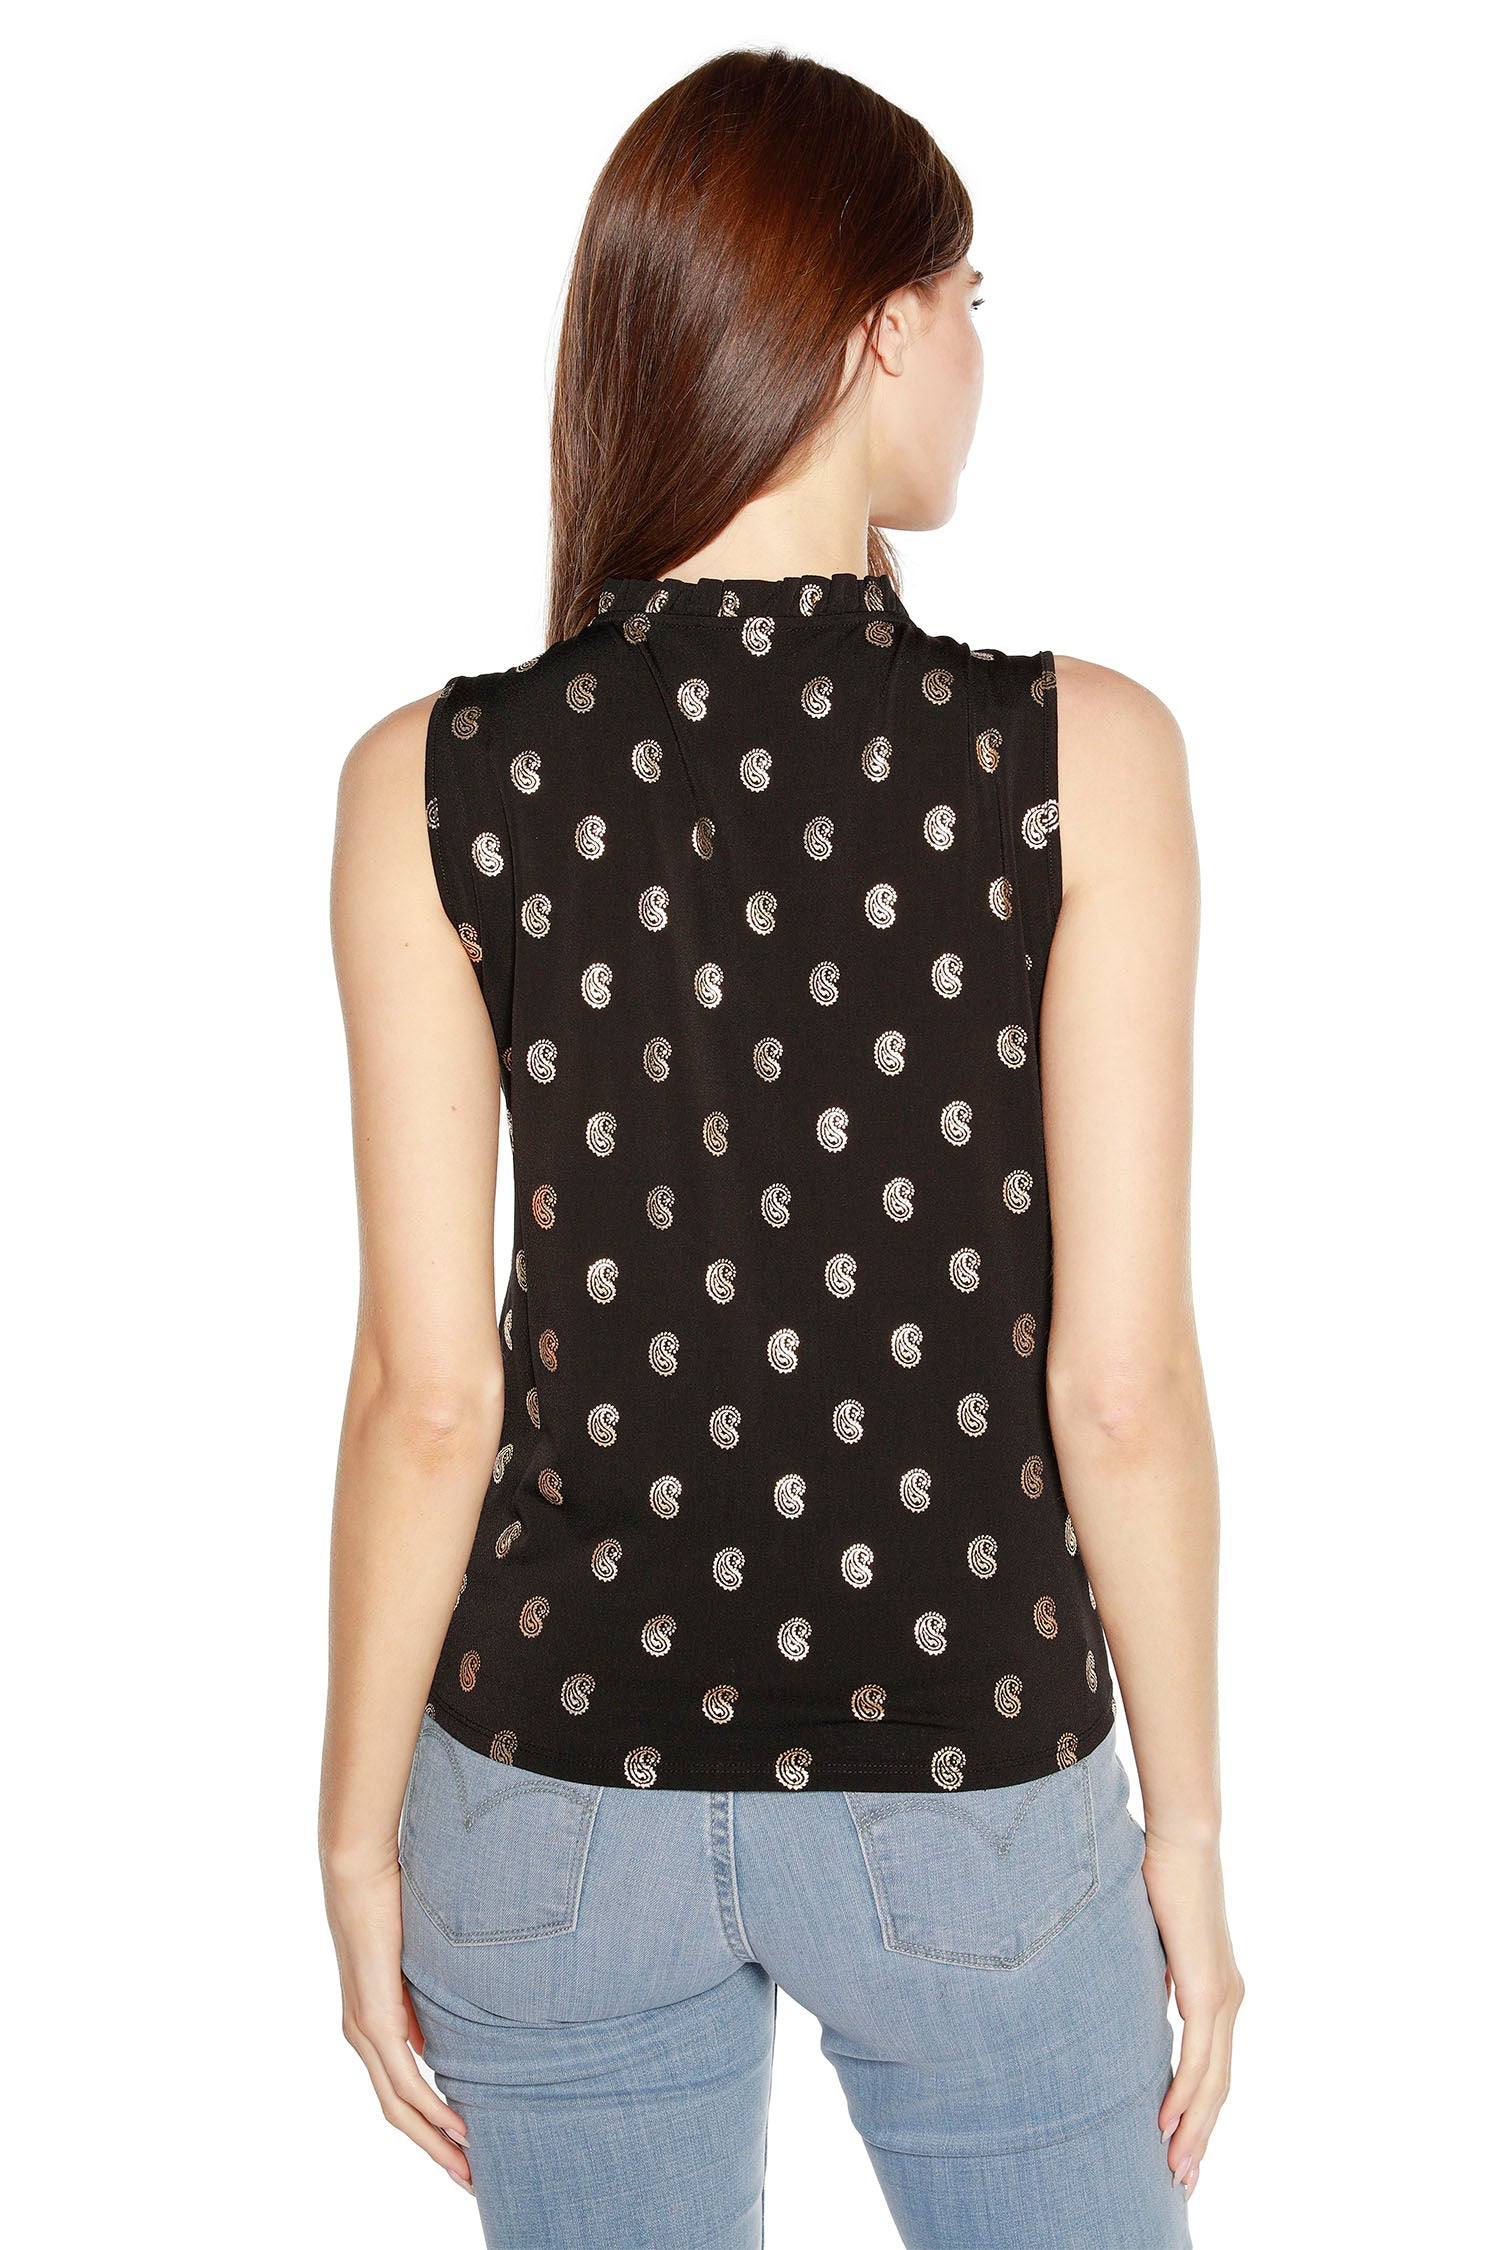 Women’s Foil Print Paisley Sleeveless Top with Front Tie